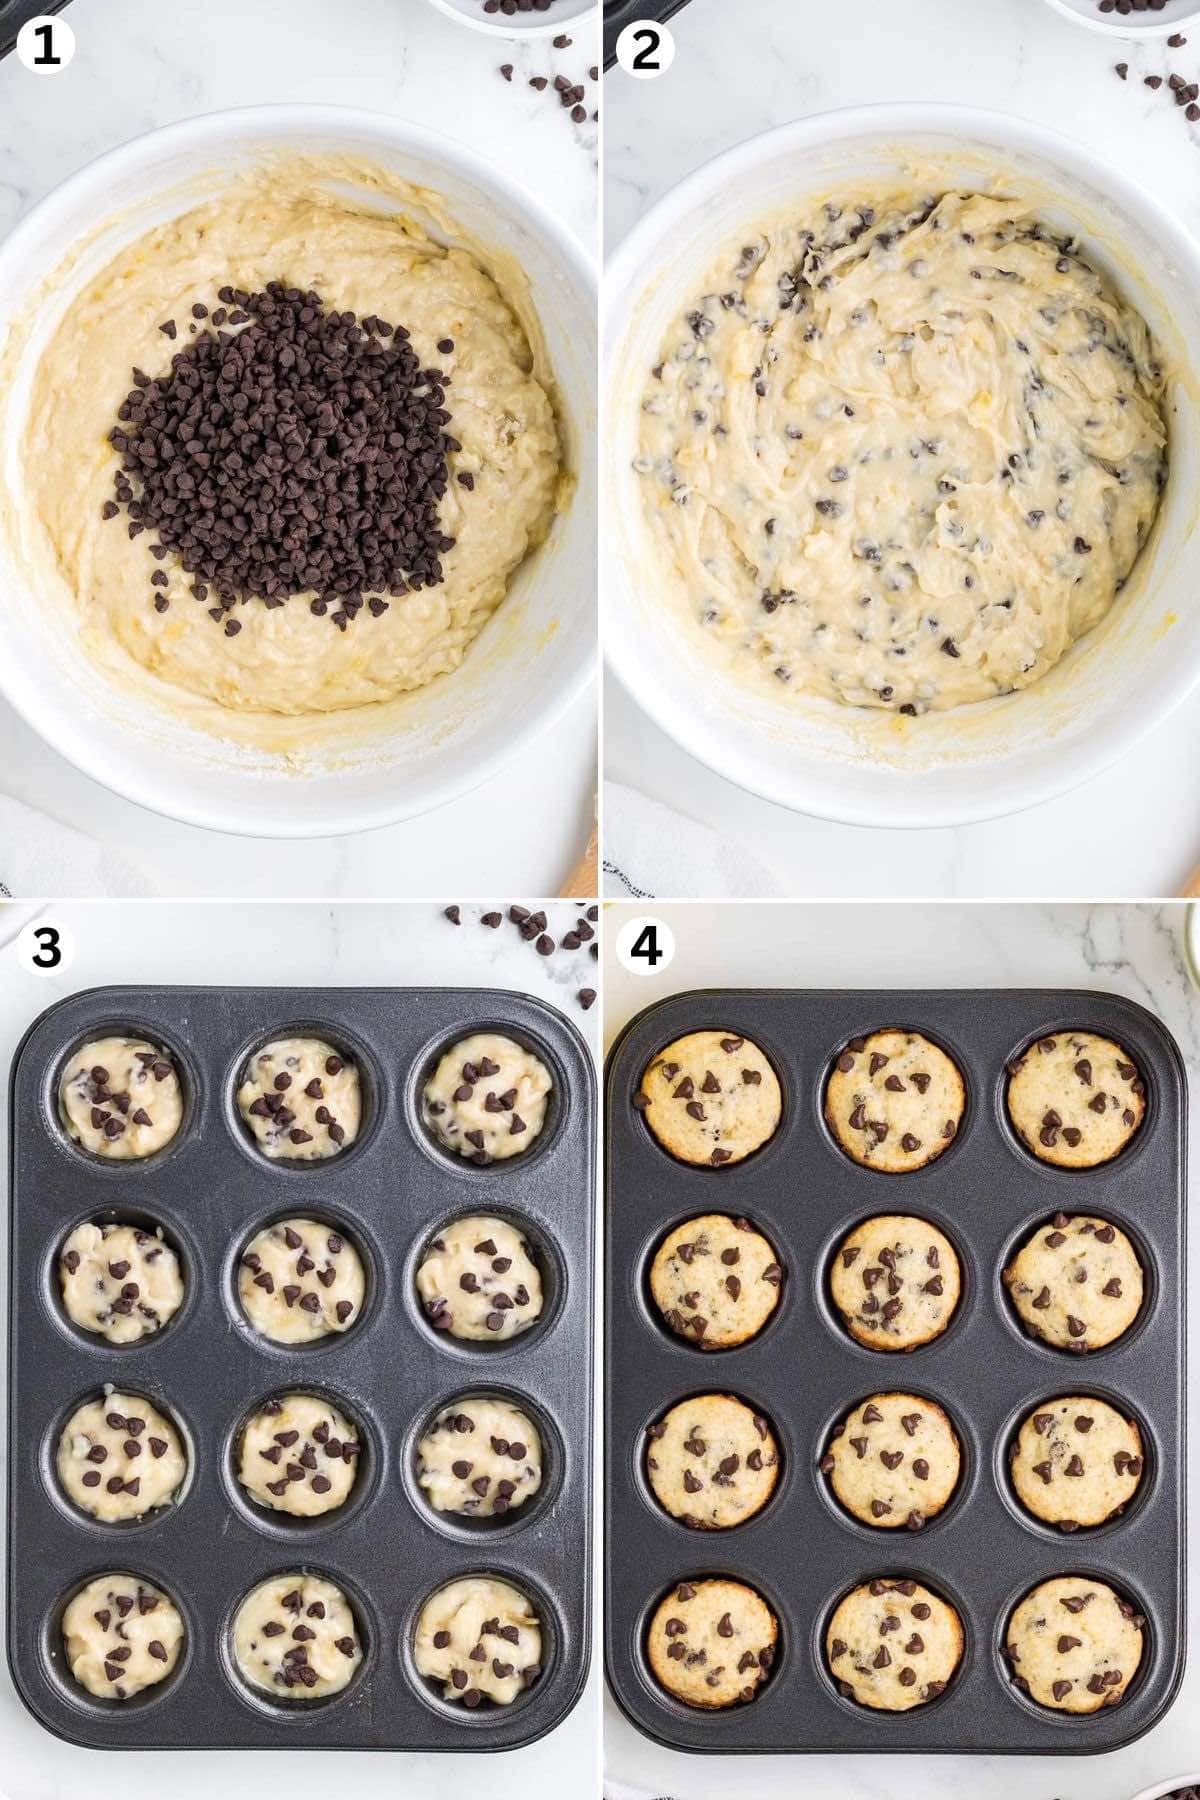 mix the ingredients in a bowl to make the batter. add mini chocolate chips into the bowl. pour into muffin pan and bake.